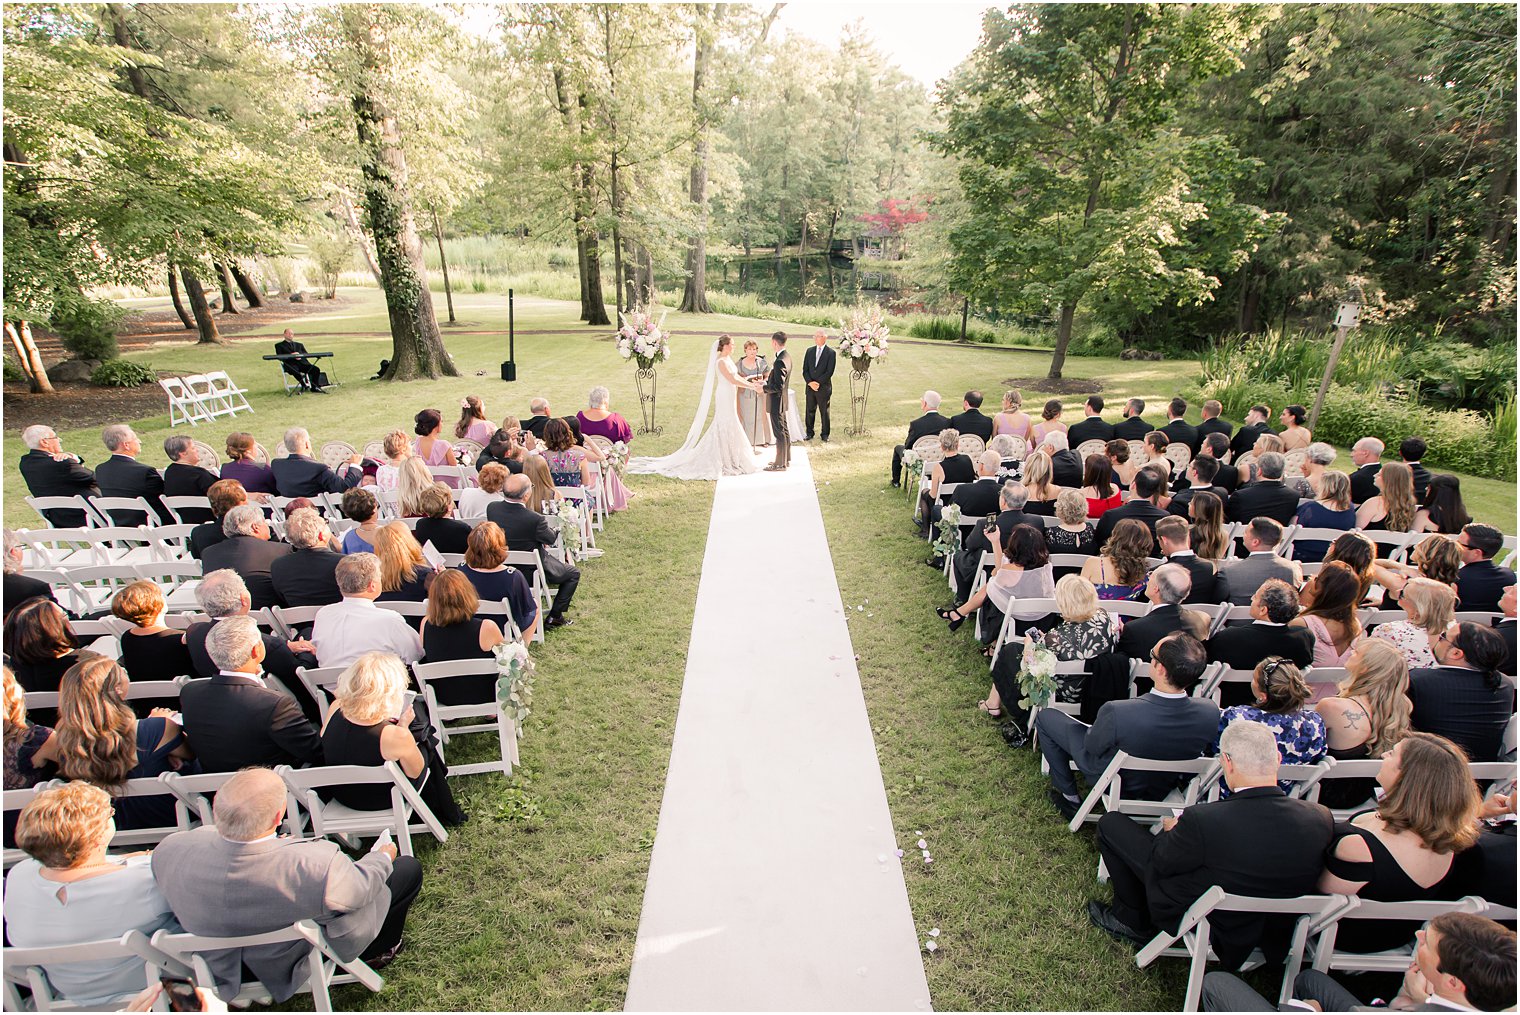 Outdoor ceremony at Pleasantdale Chateau in West Orange, NJ